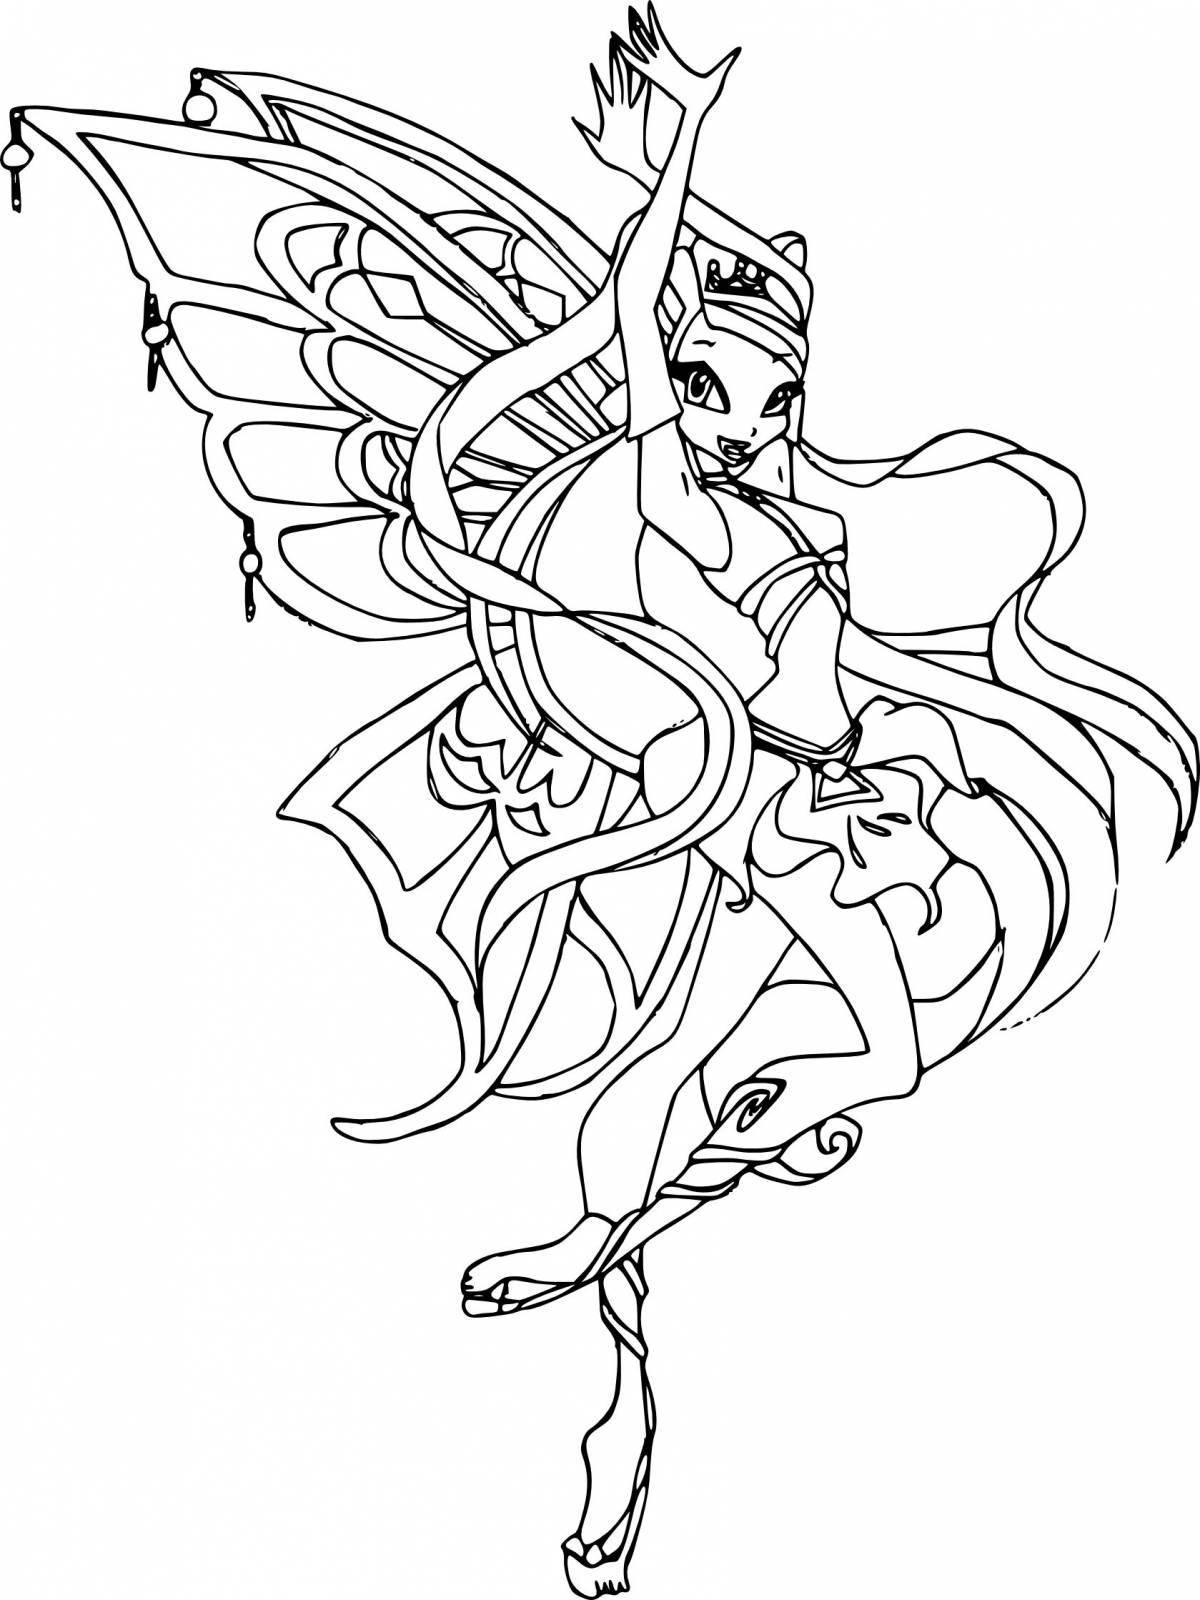 Coloring book twinkling winx stella